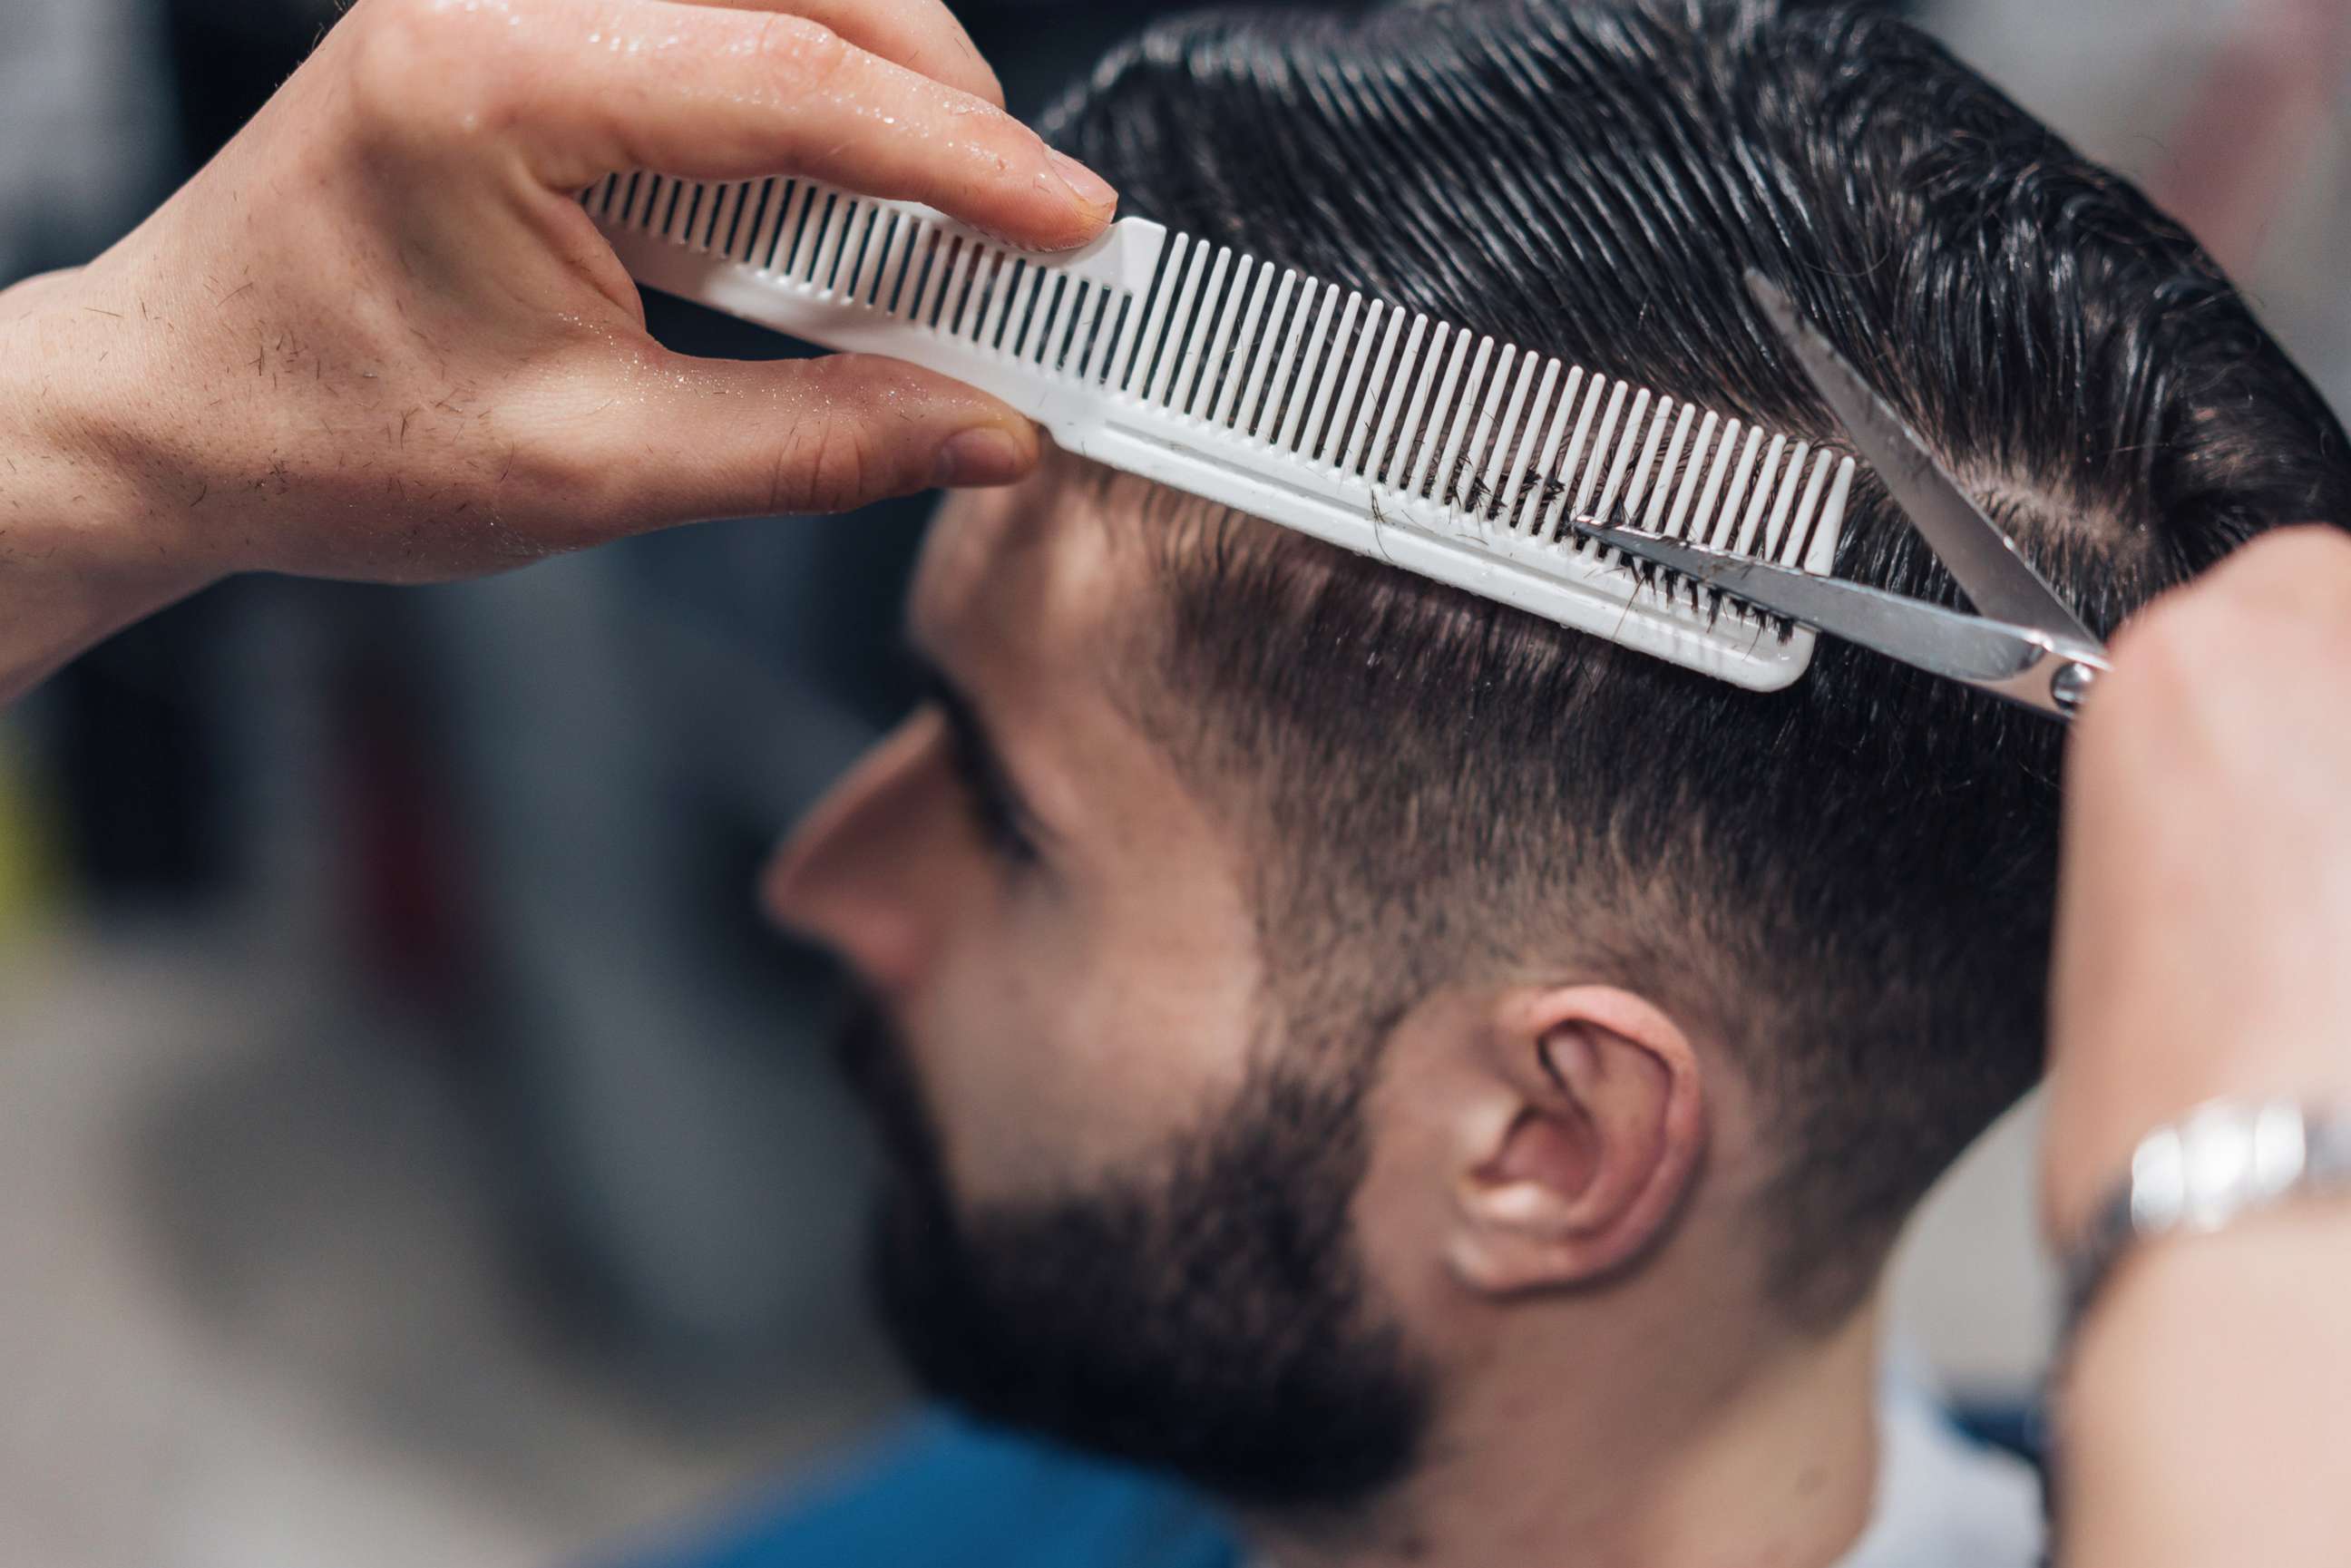 How to cut men's hair from home, according to celebrity hairstylist Kristan  Serafino - ABC News